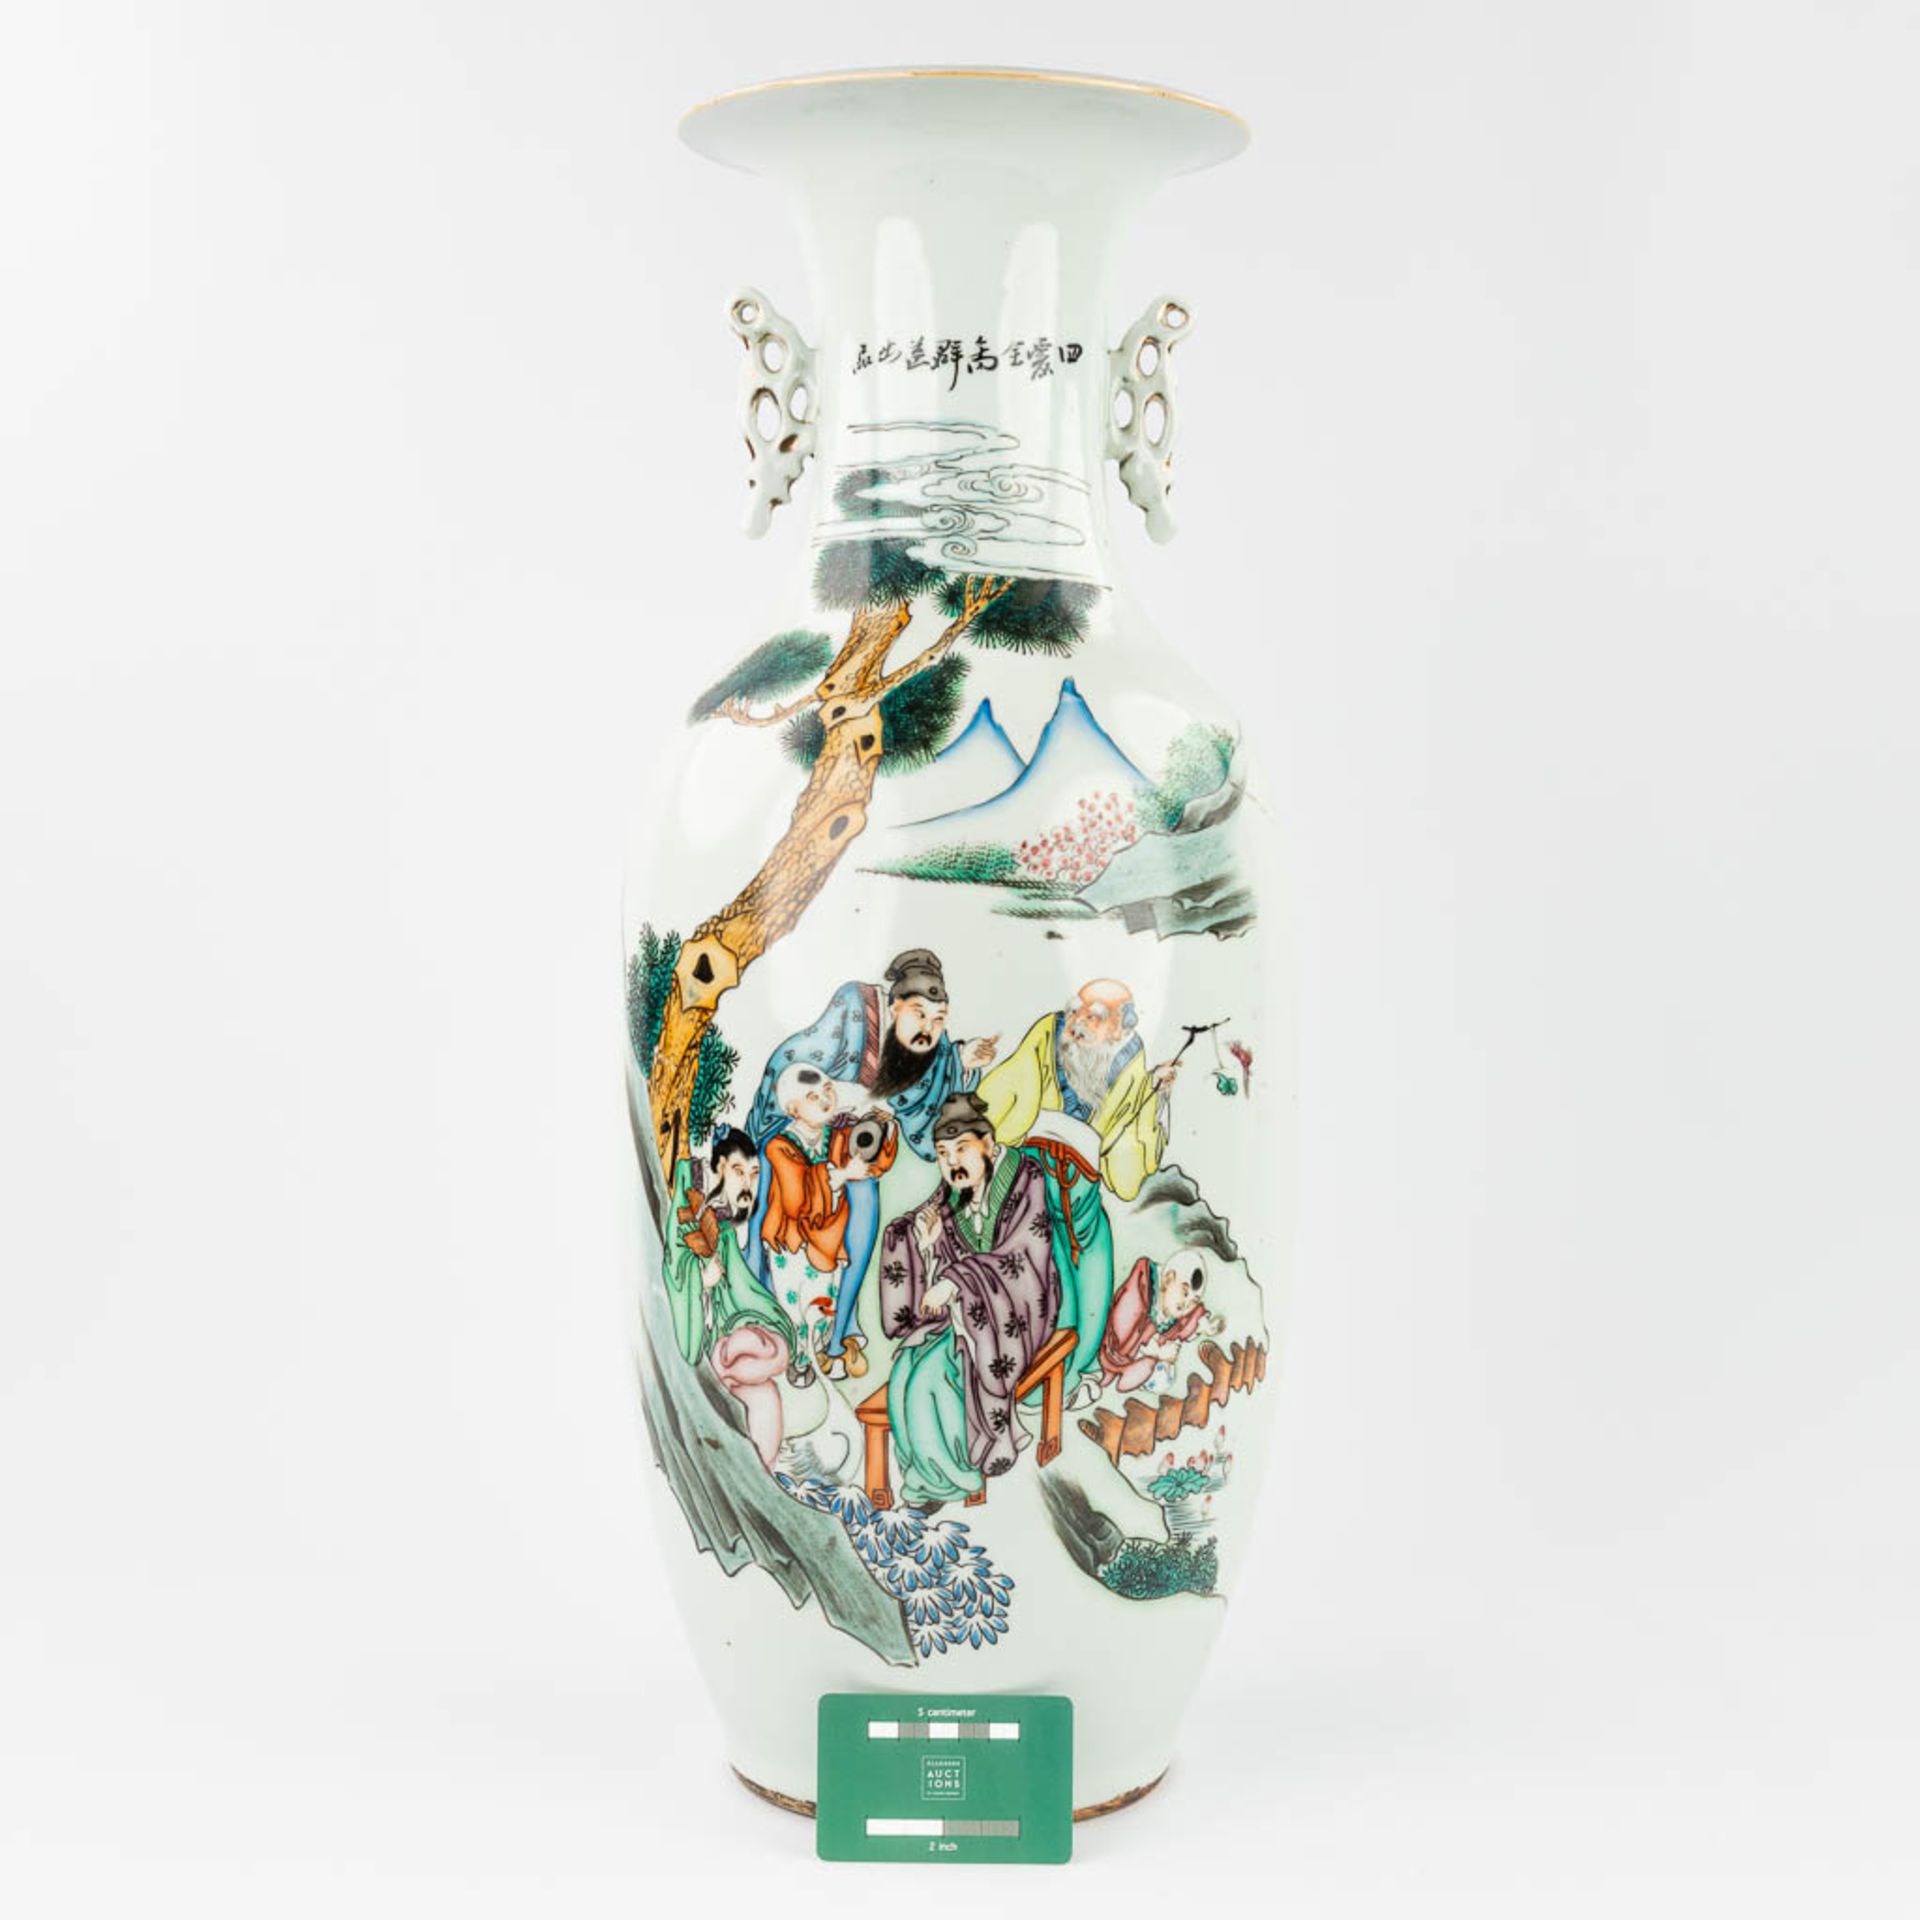 A Chinese vase made of porcelain and decorated with wise men in the garden. (59 x 23 cm) - Image 12 of 14